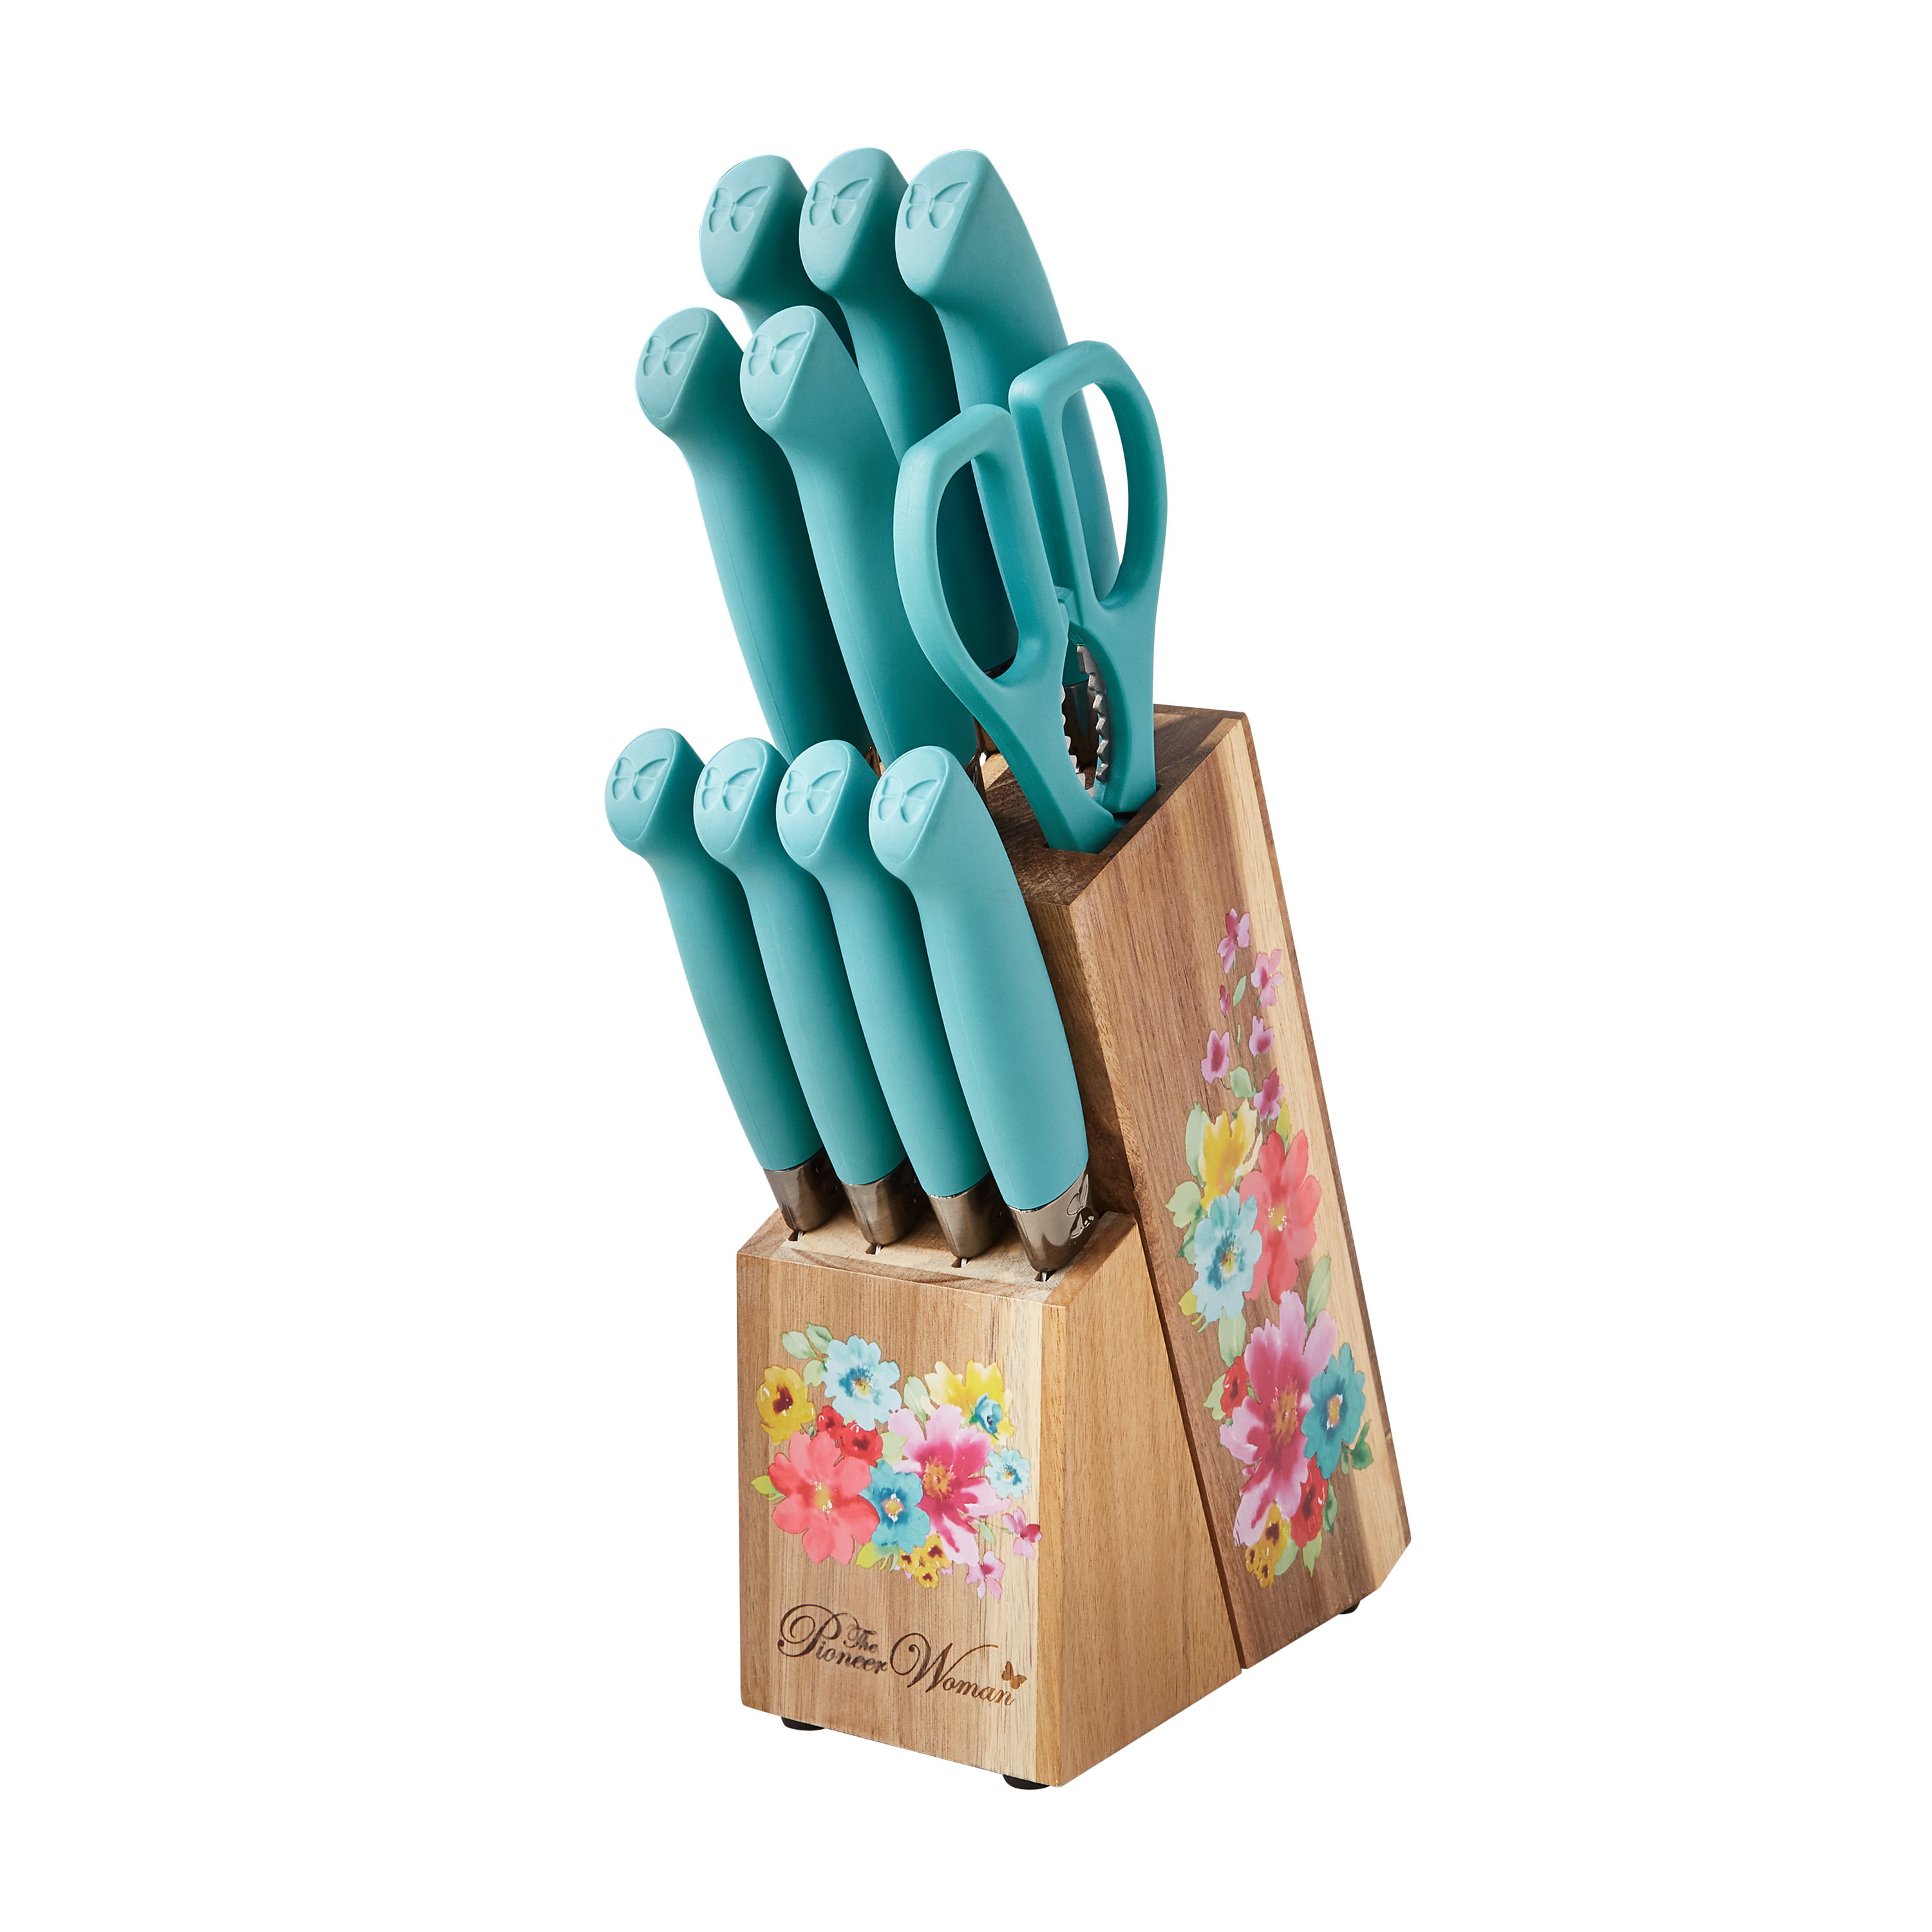 The Pioneer Woman Breezy Blossoms 11-Piece Stainless Steel Knife Block Set